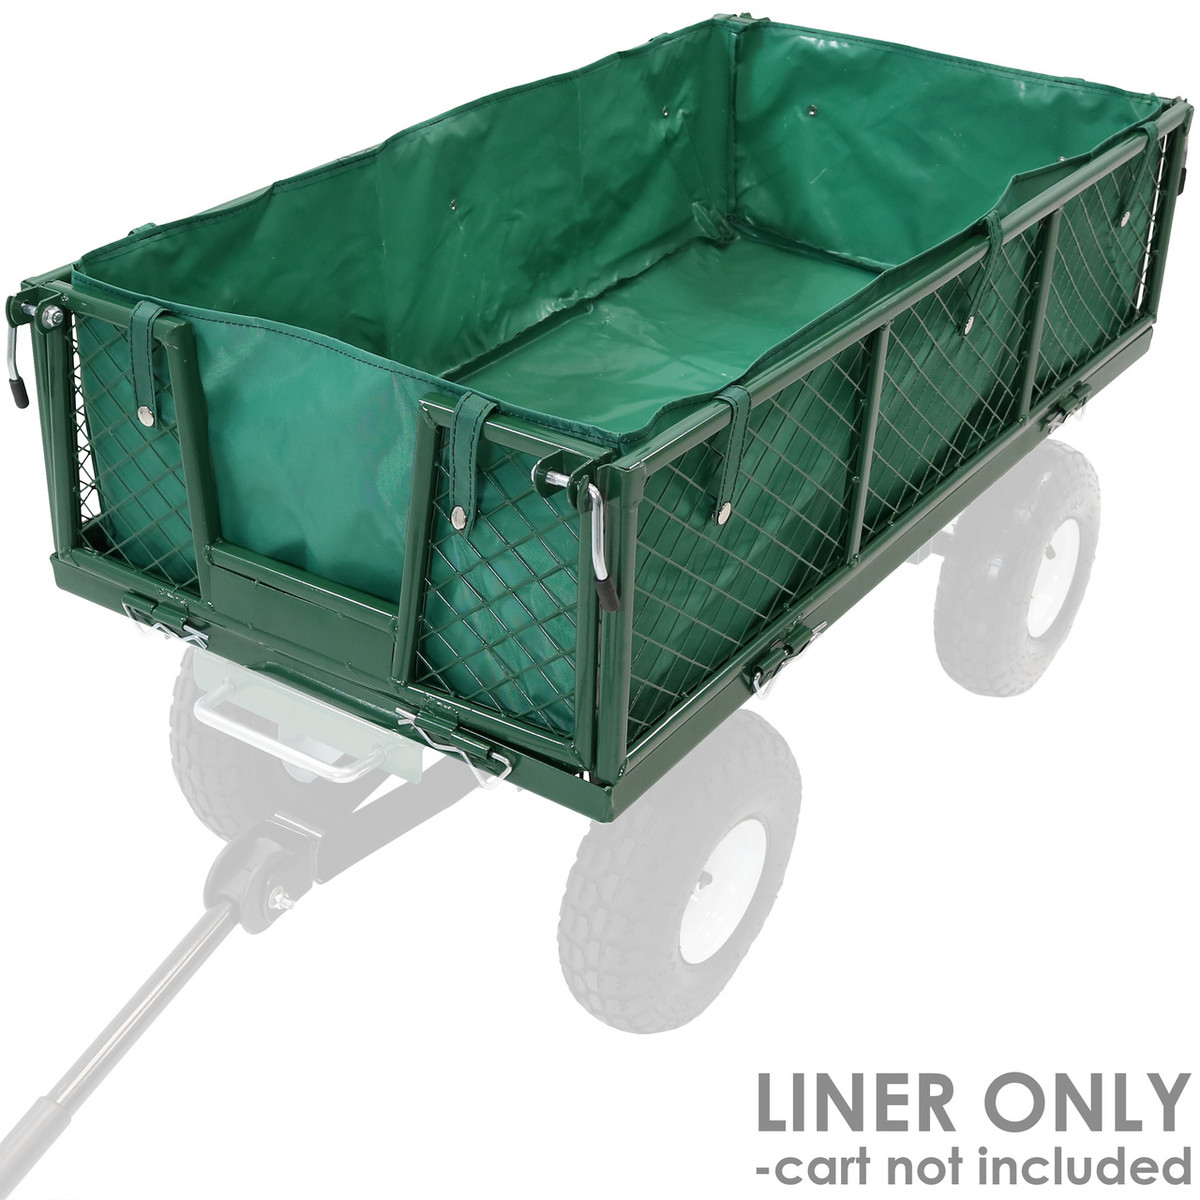 Green Includes Liner Only Sunnydaze Heavy-Duty Dumping Utility Cart Liner 